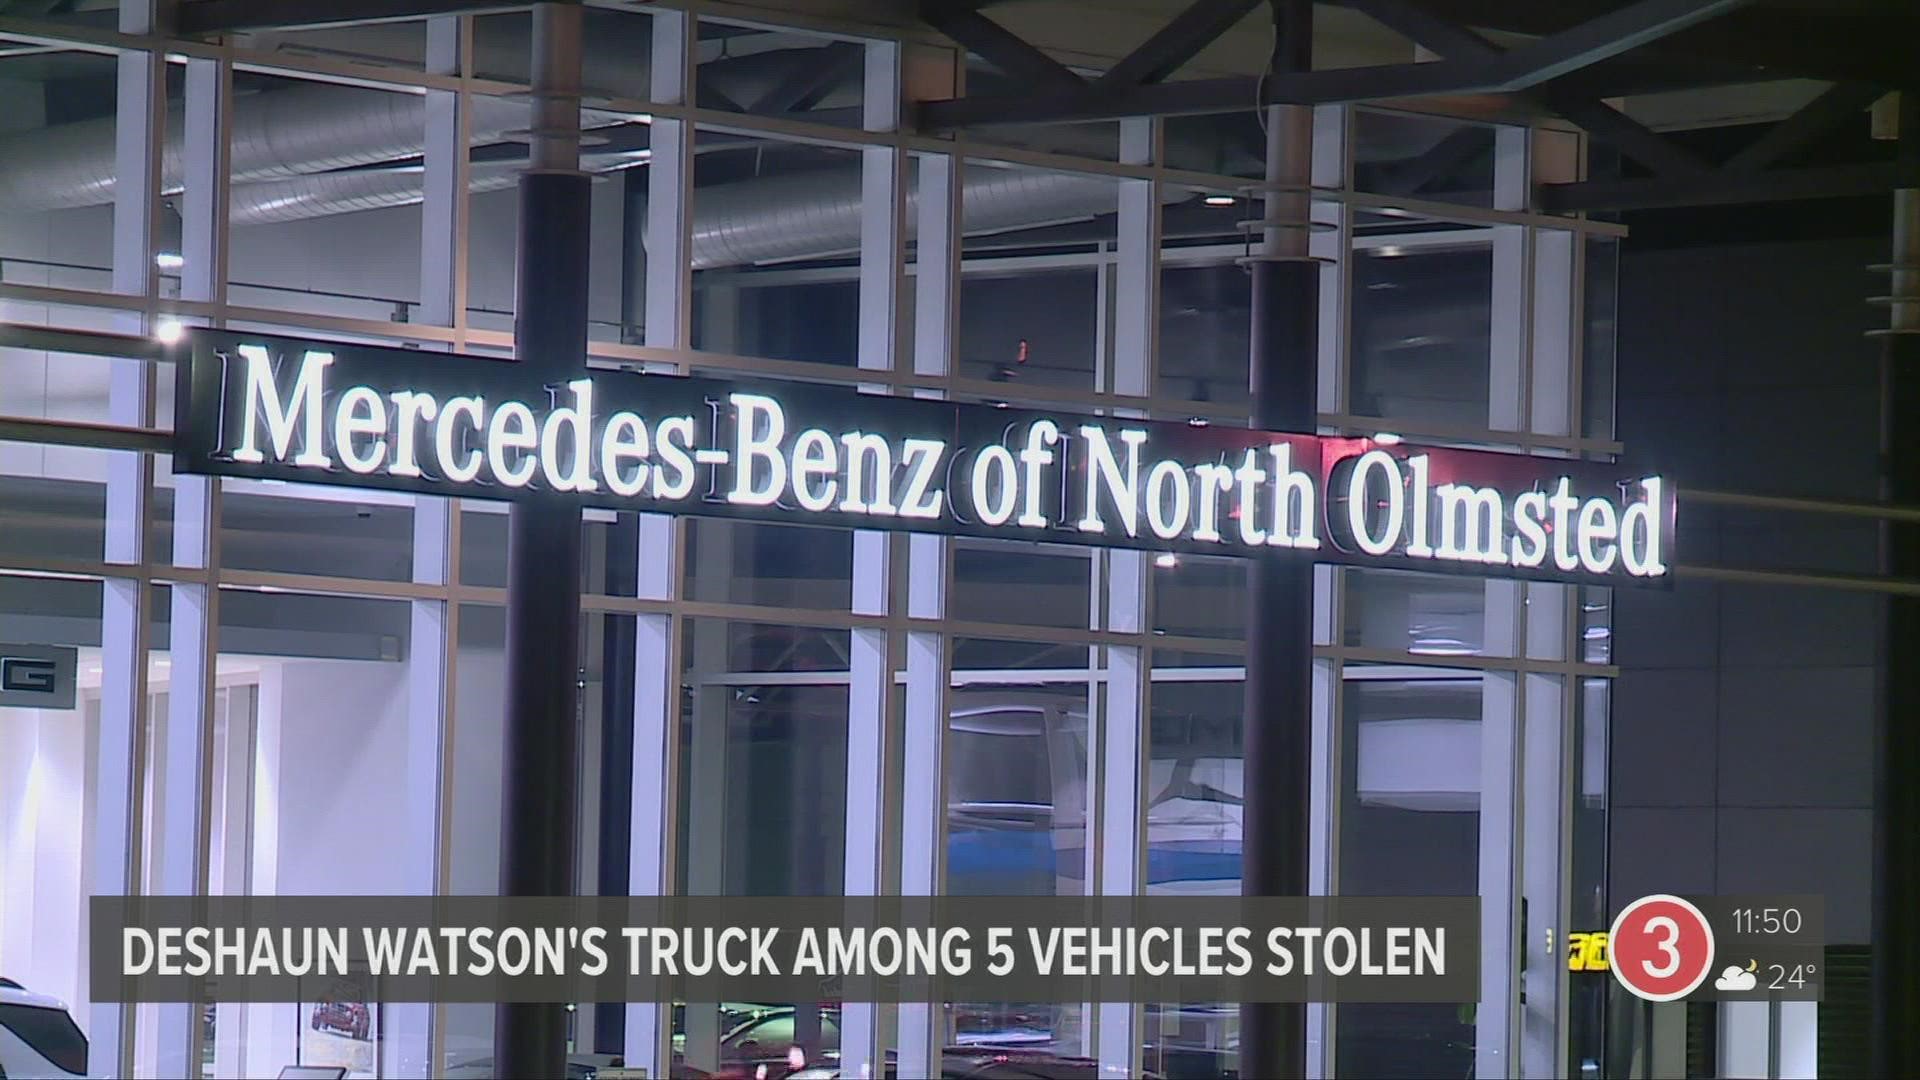 Four of the vehicles were described as 'Mercedes' vehicles, the fifth vehicle was a Dodge Ram pickup owned by Watson.